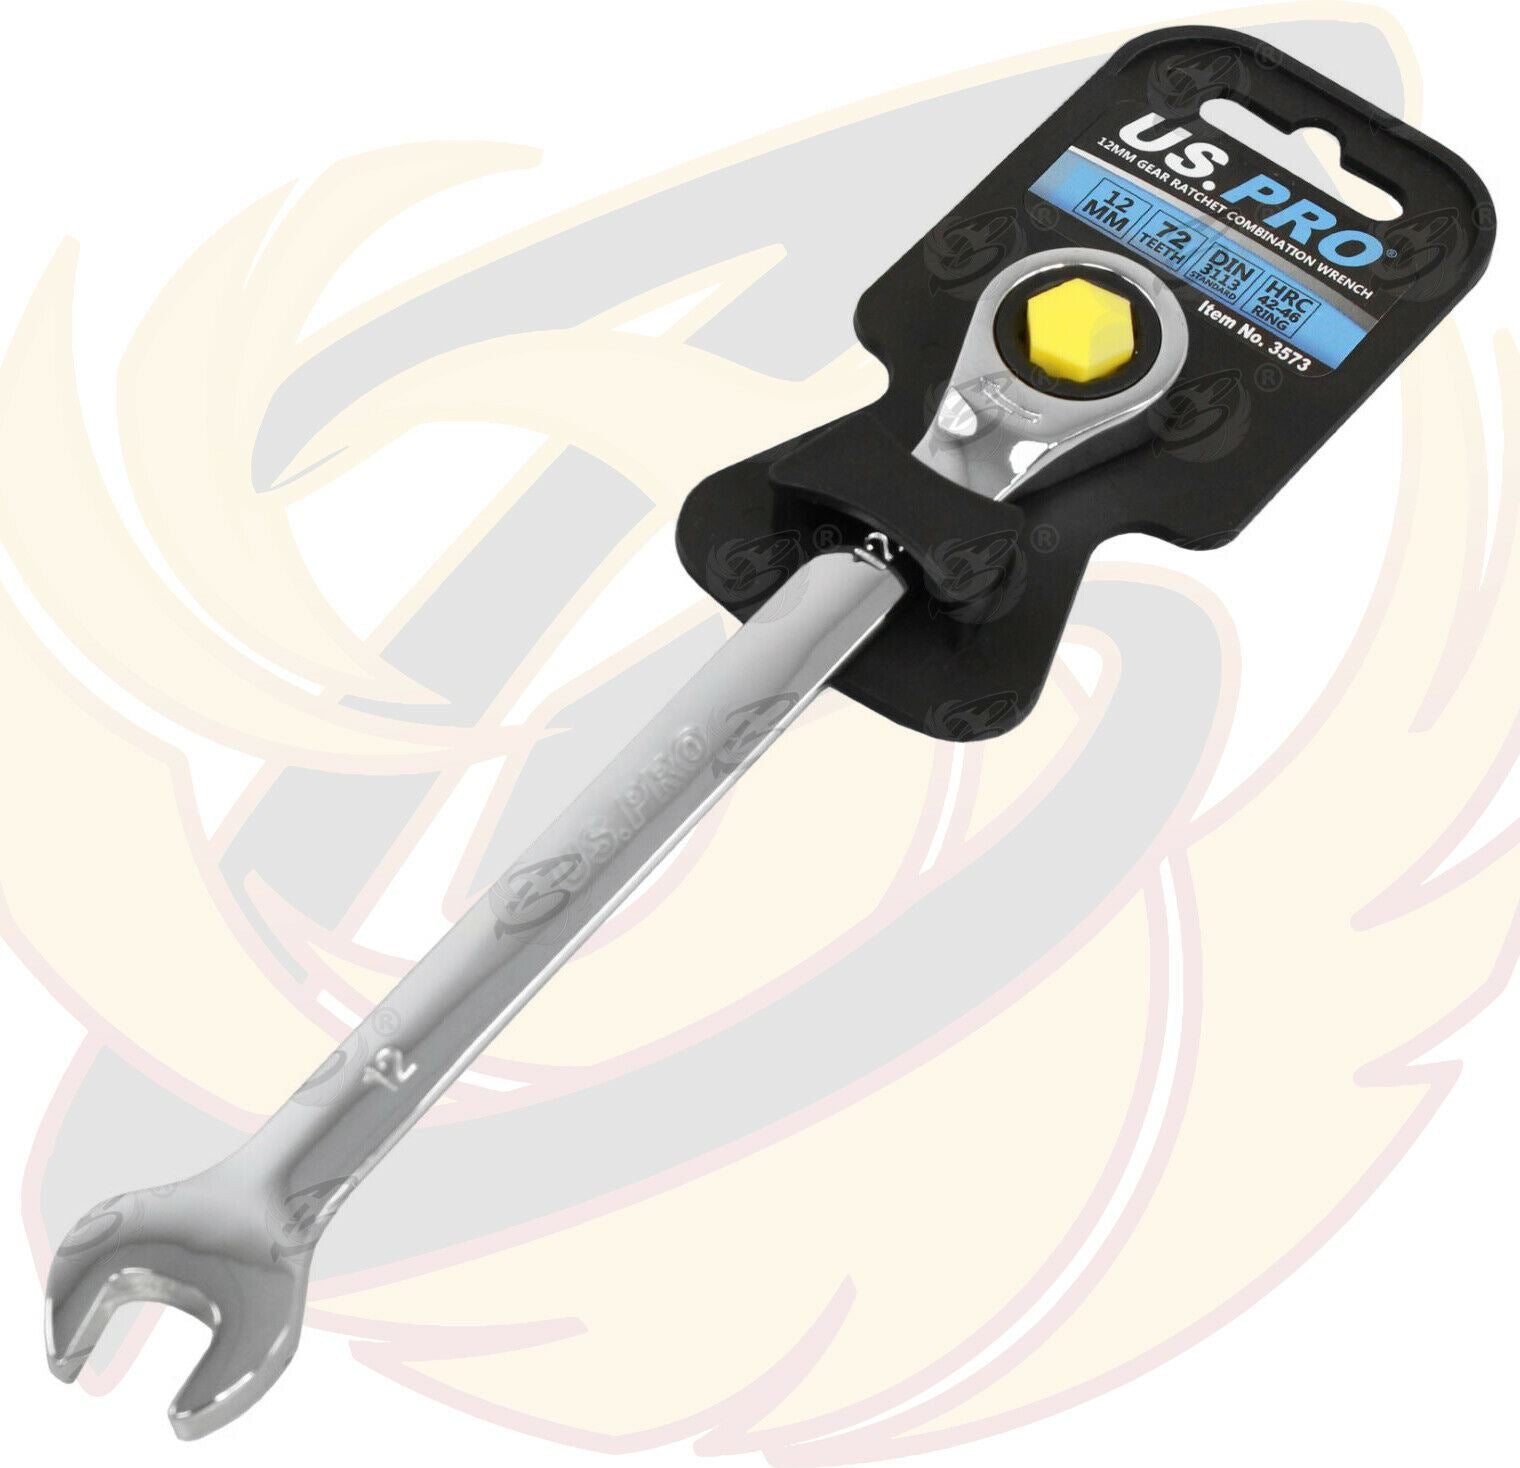 US PRO 12MM 72 TOOTH RATCHET SPANNER